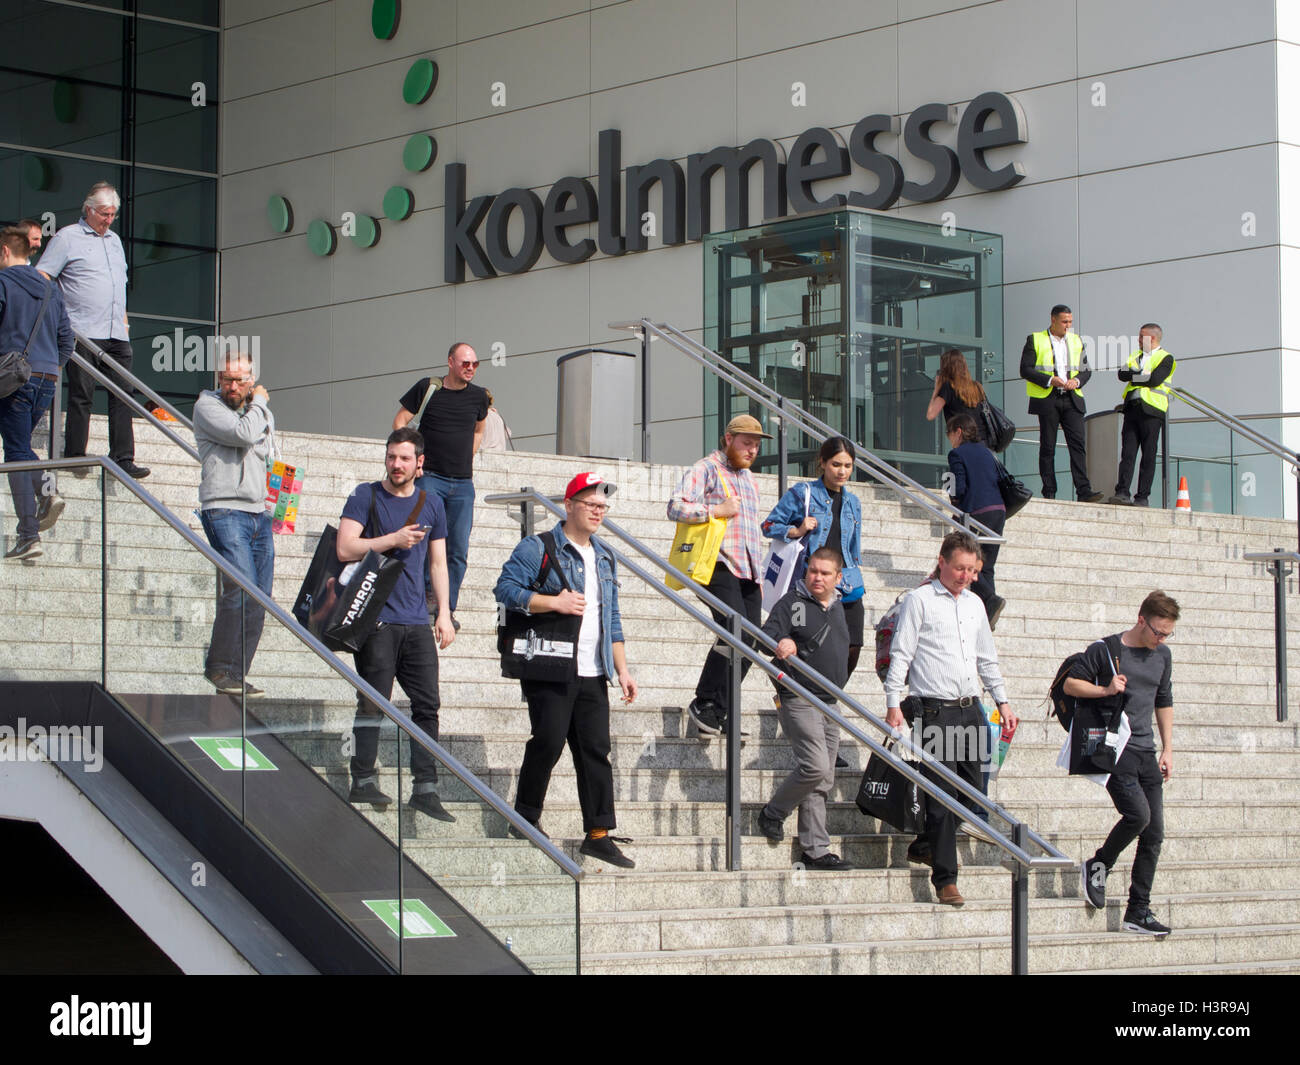 Koeln Messe entrance name sign steps with people in Cologne, Germany Stock Photo